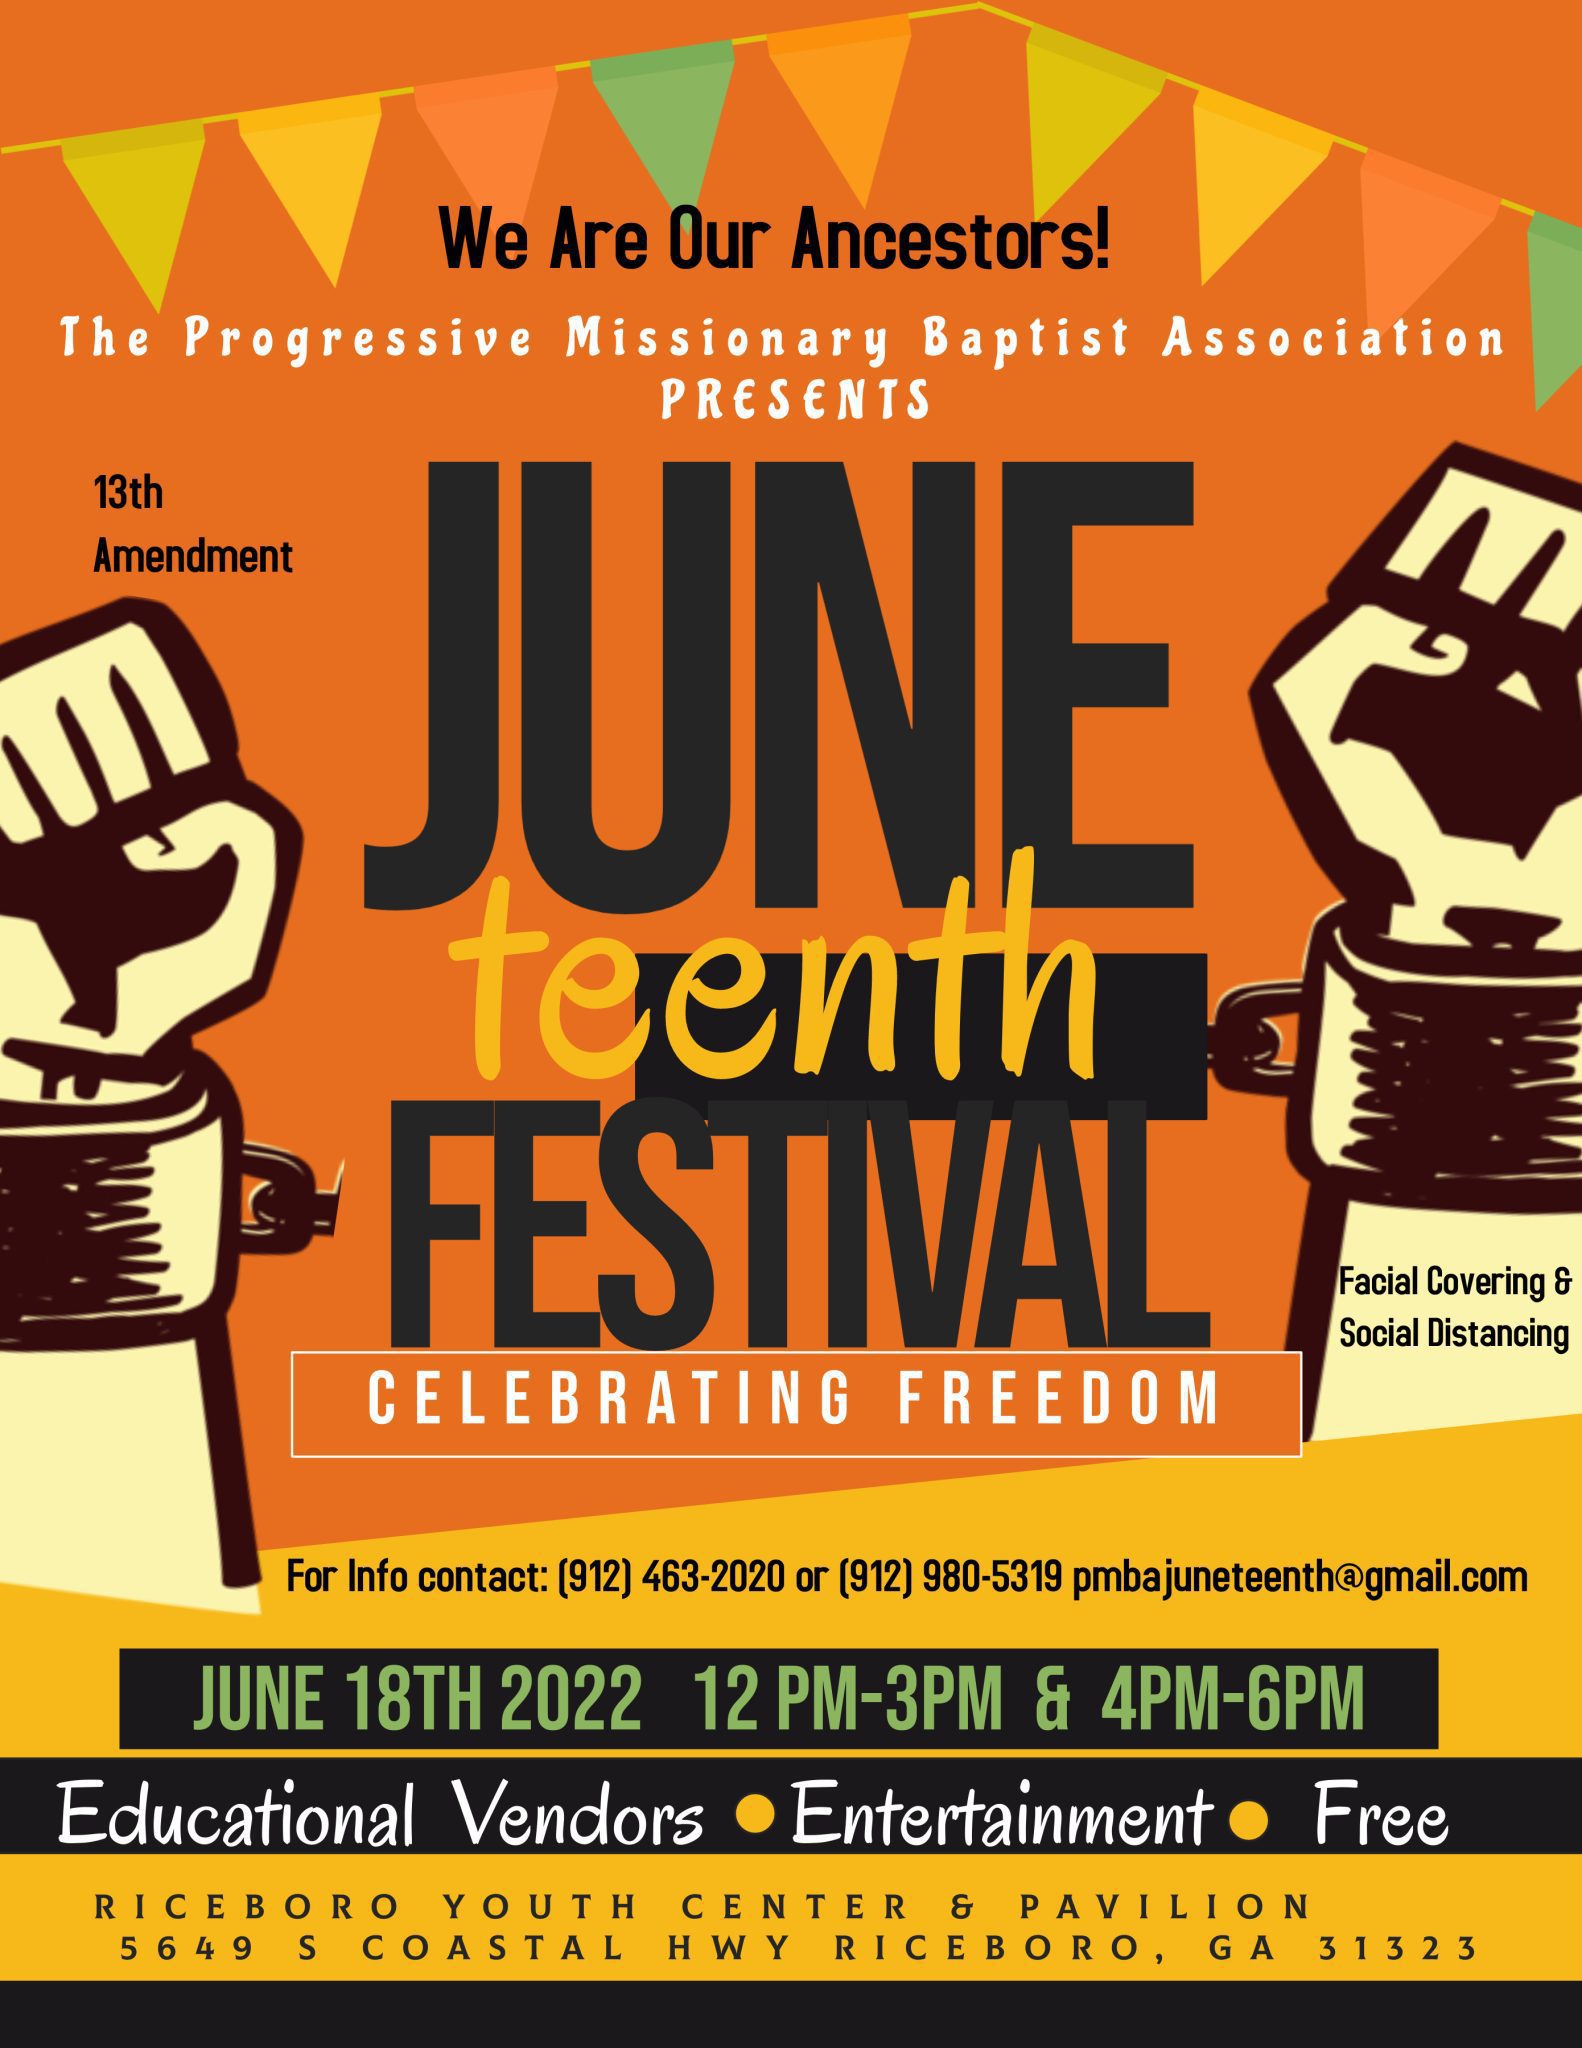 Juneteenth Festival in Liberty County